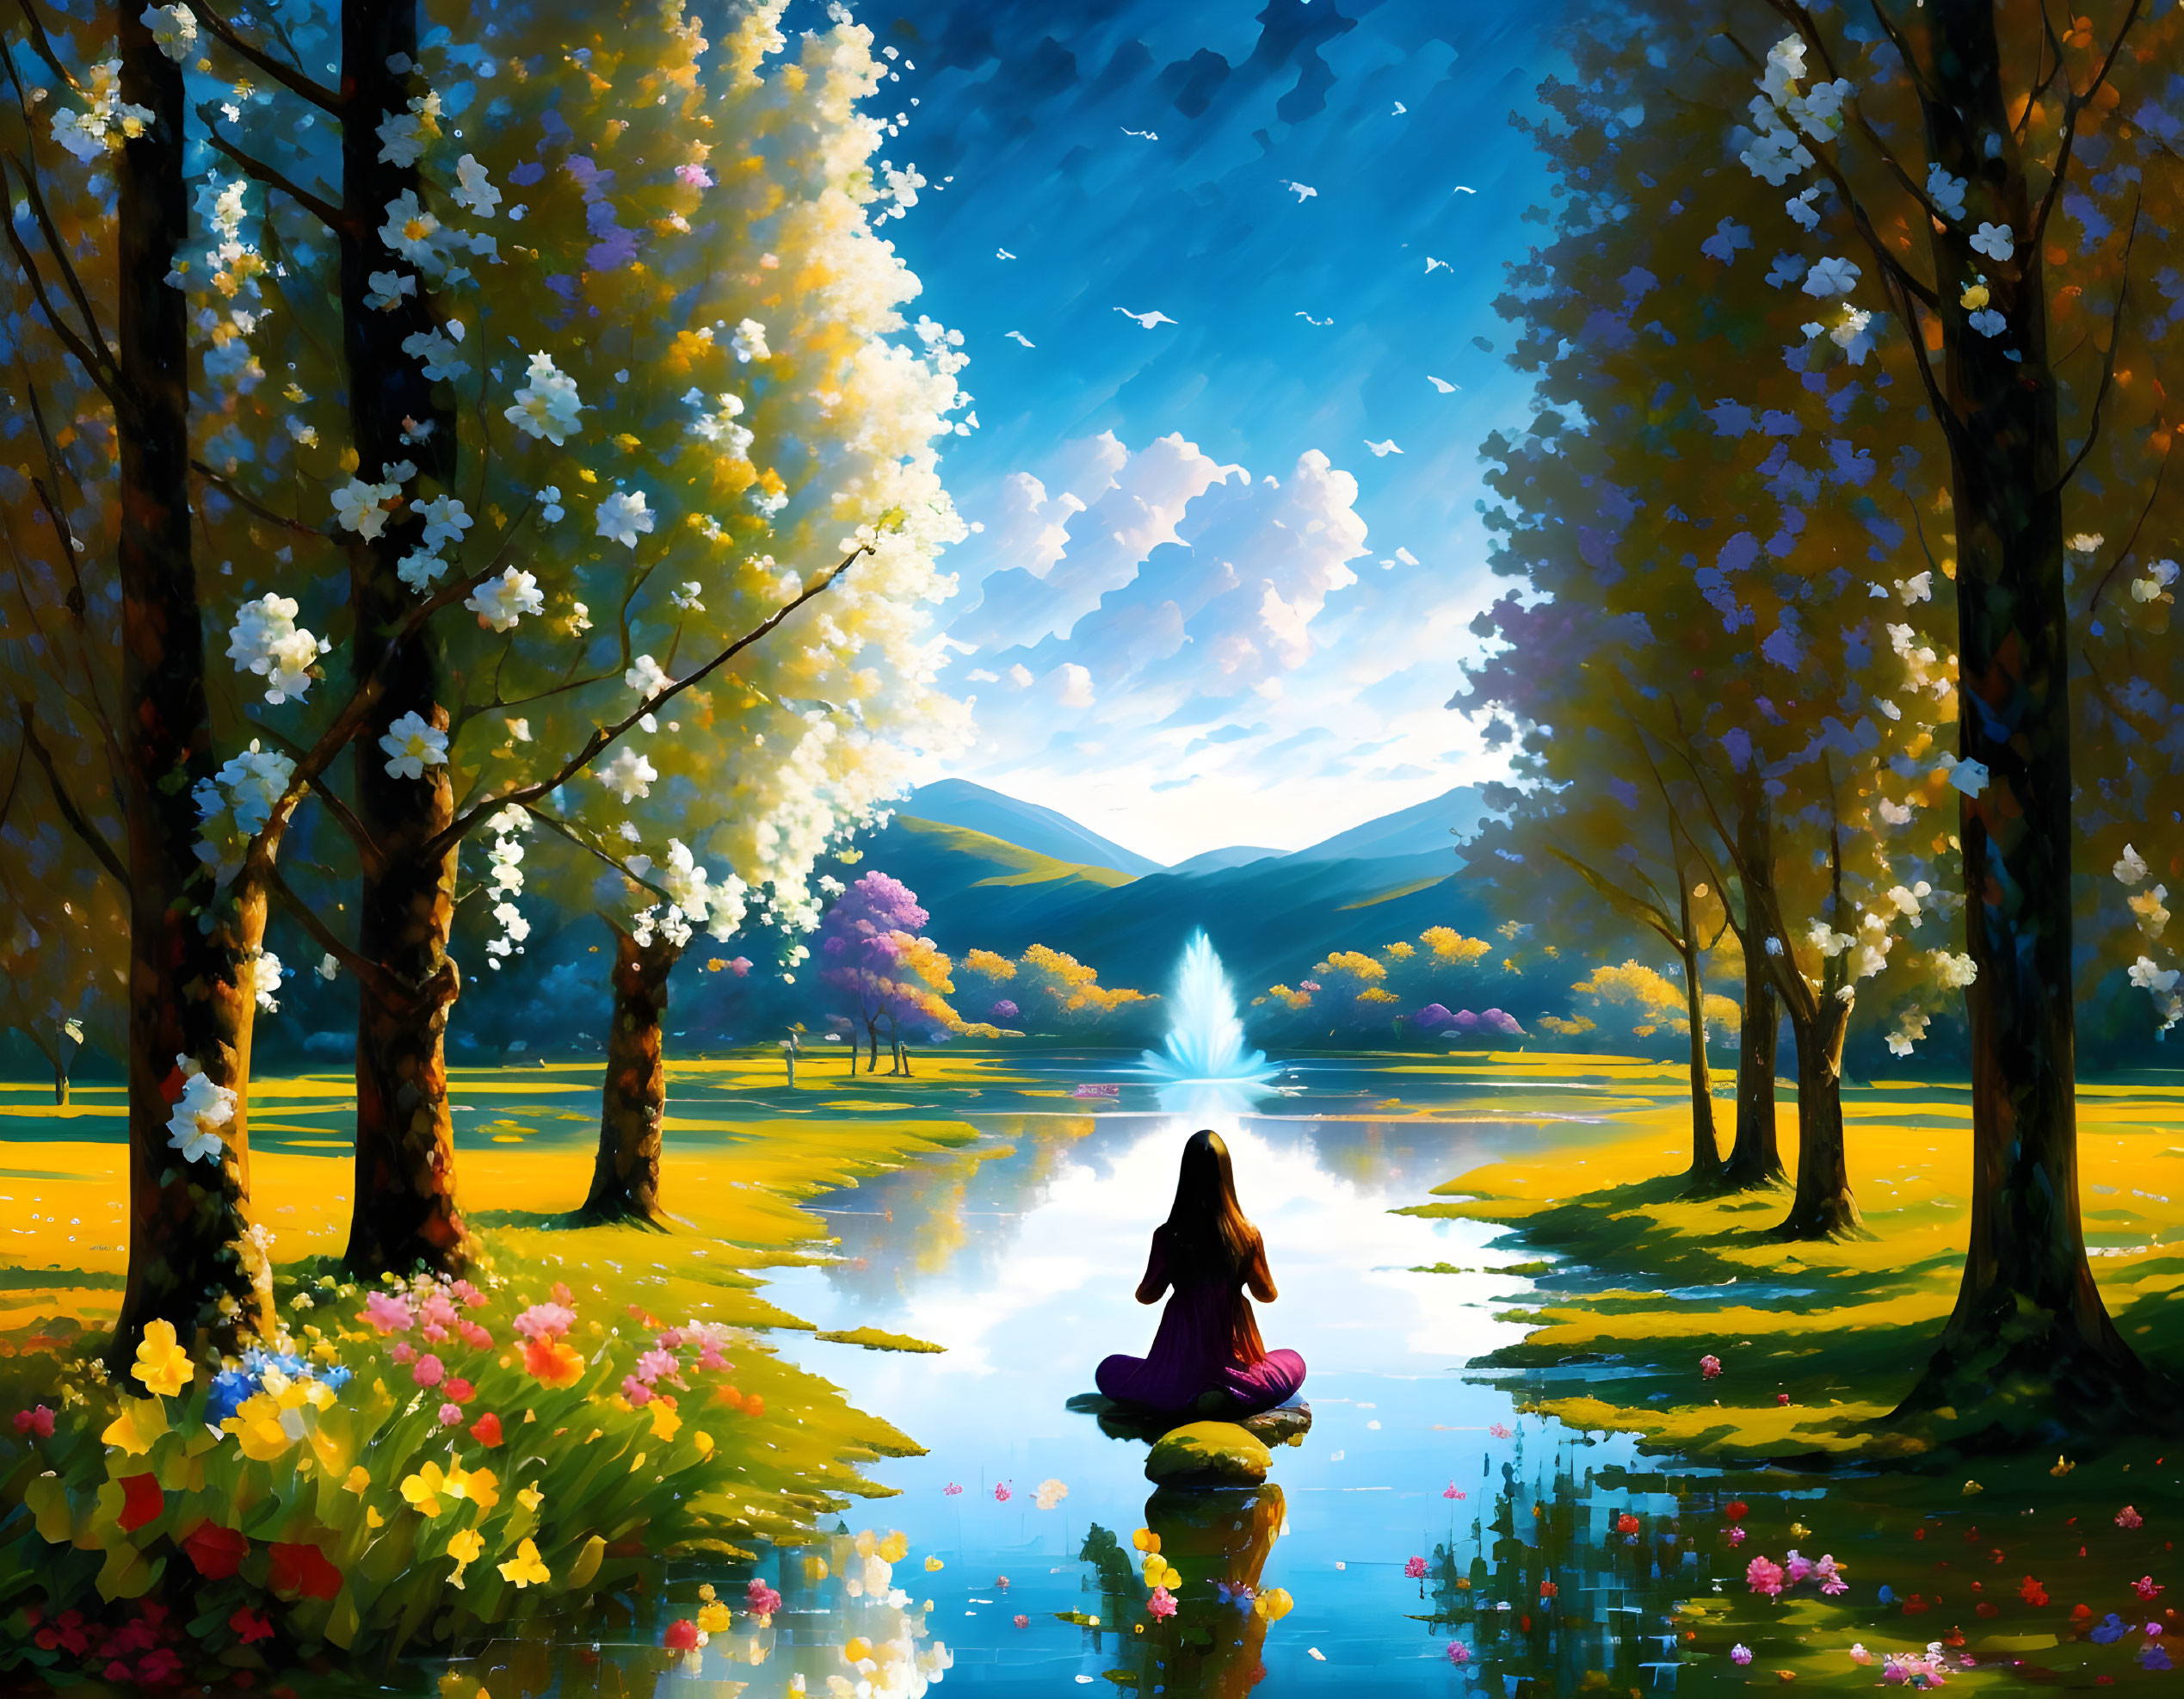 Tranquil lake scene with vibrant trees, mountains, and birds